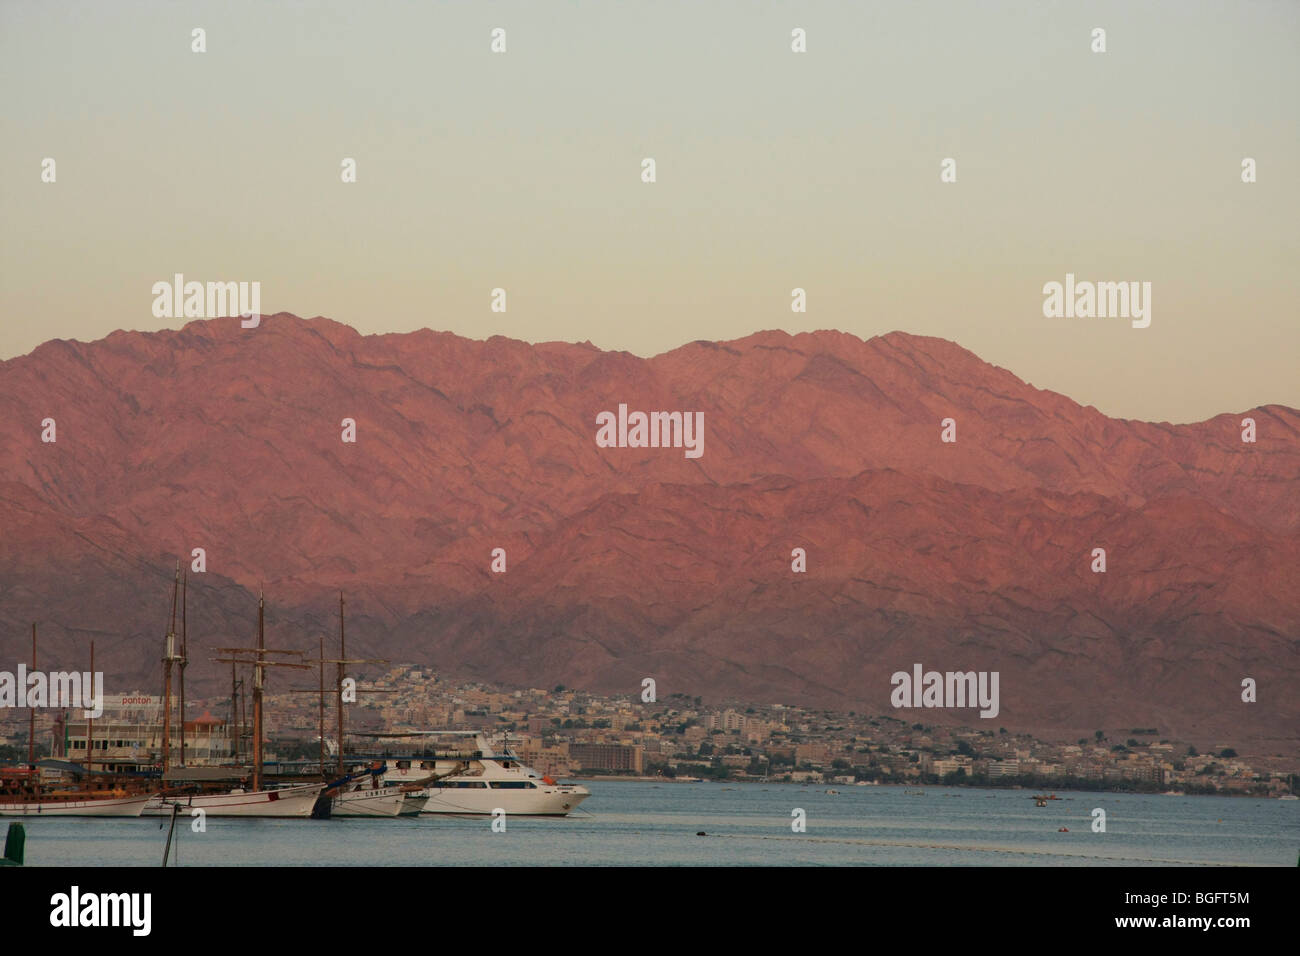 Israel, a view of Aqaba as seen from Eilat Stock Photo